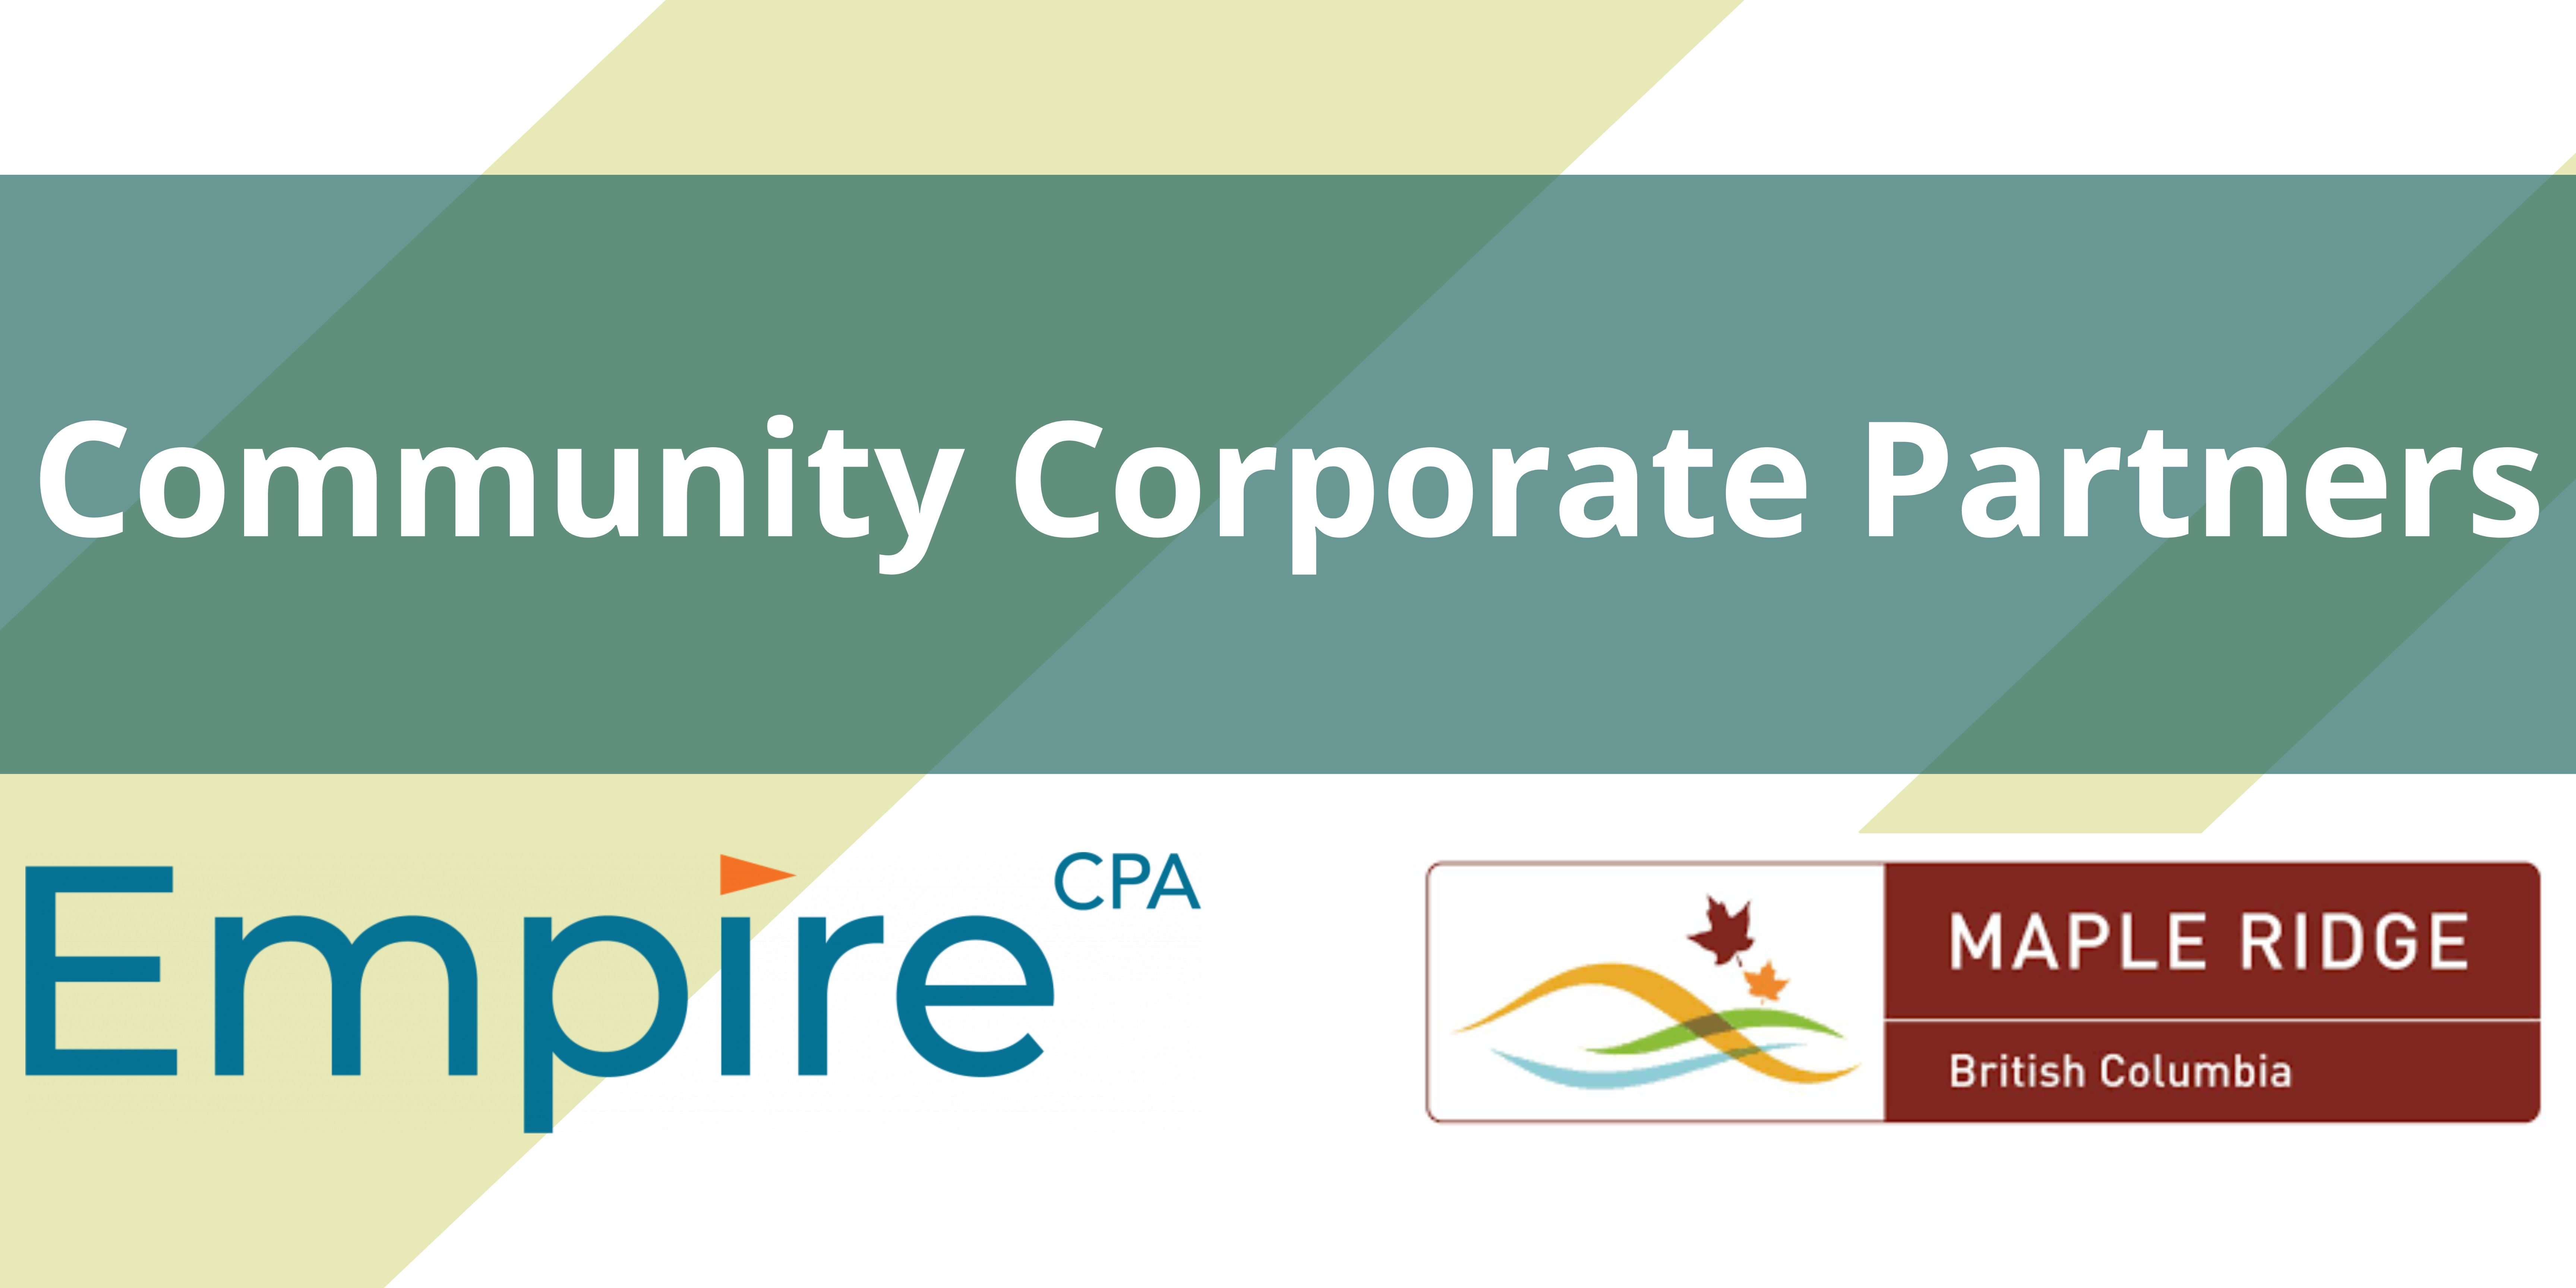 Image for Community Corporate Partners: Empire CPA and the City of Maple Ridge